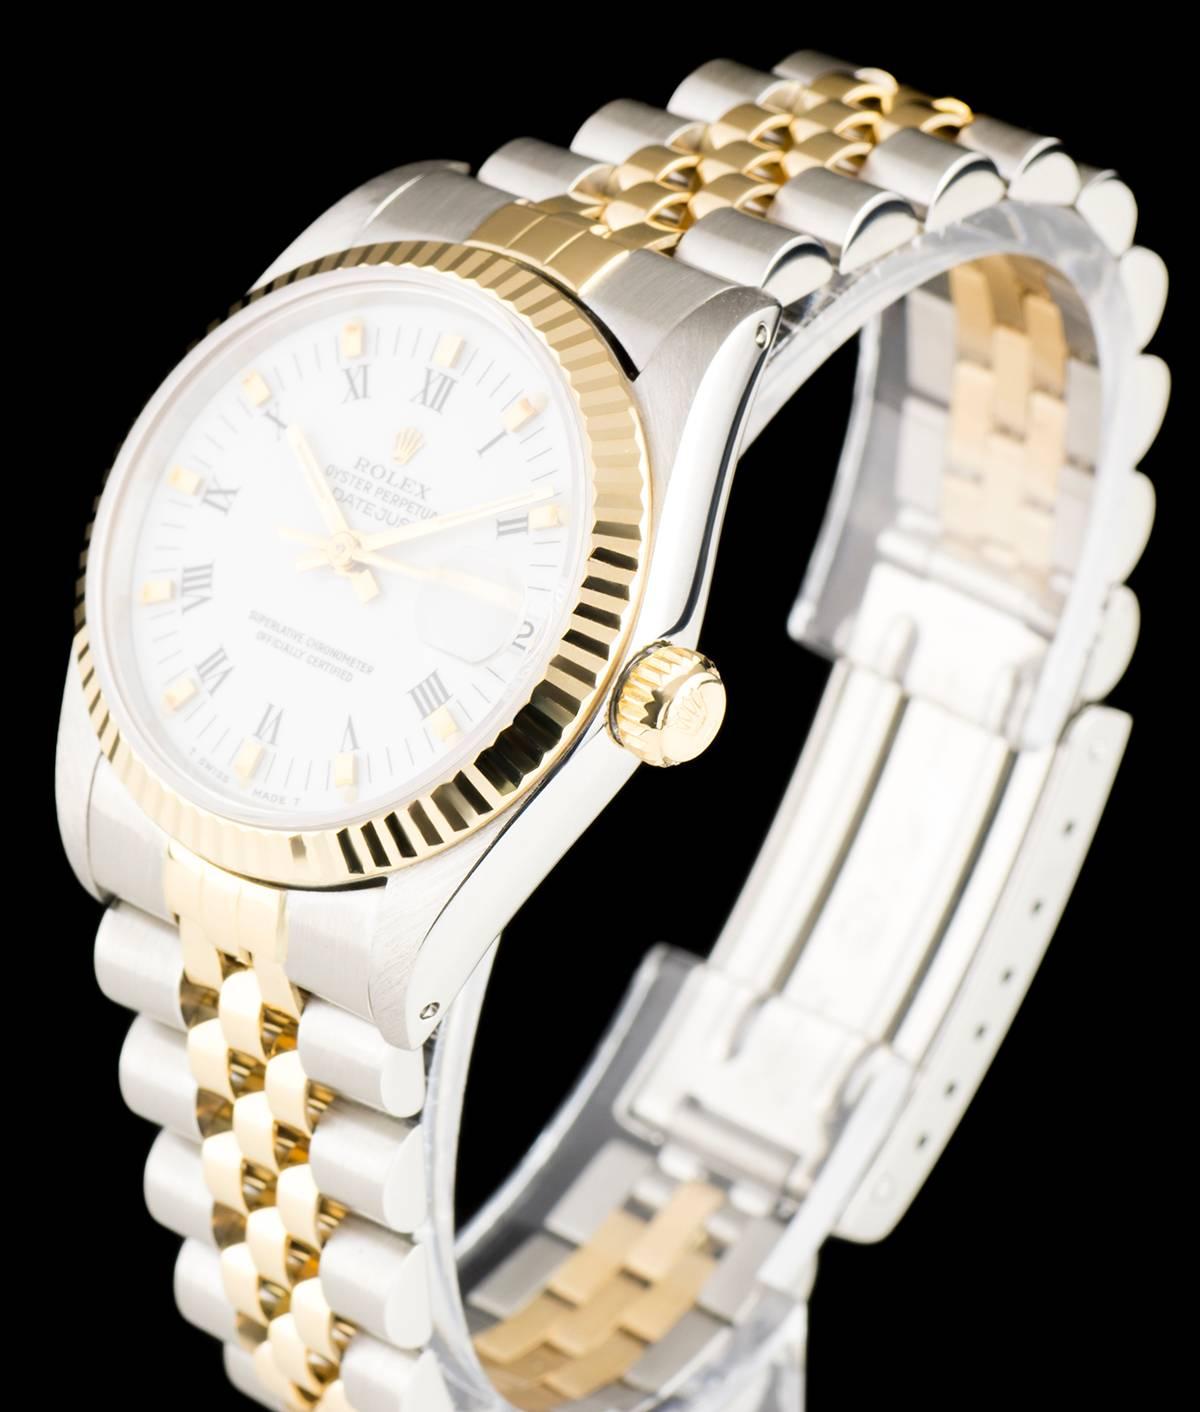 A Stainless Steel & 18k Yellow Gold Oyster Perpetual Mid-Size Wristwatch, white dial with roman numerals, date at 3 0'clock, a fixed 18k yellow gold fluted bezel, a stainless steel and 18k yellow gold jubilee bracelet with a stainless steel